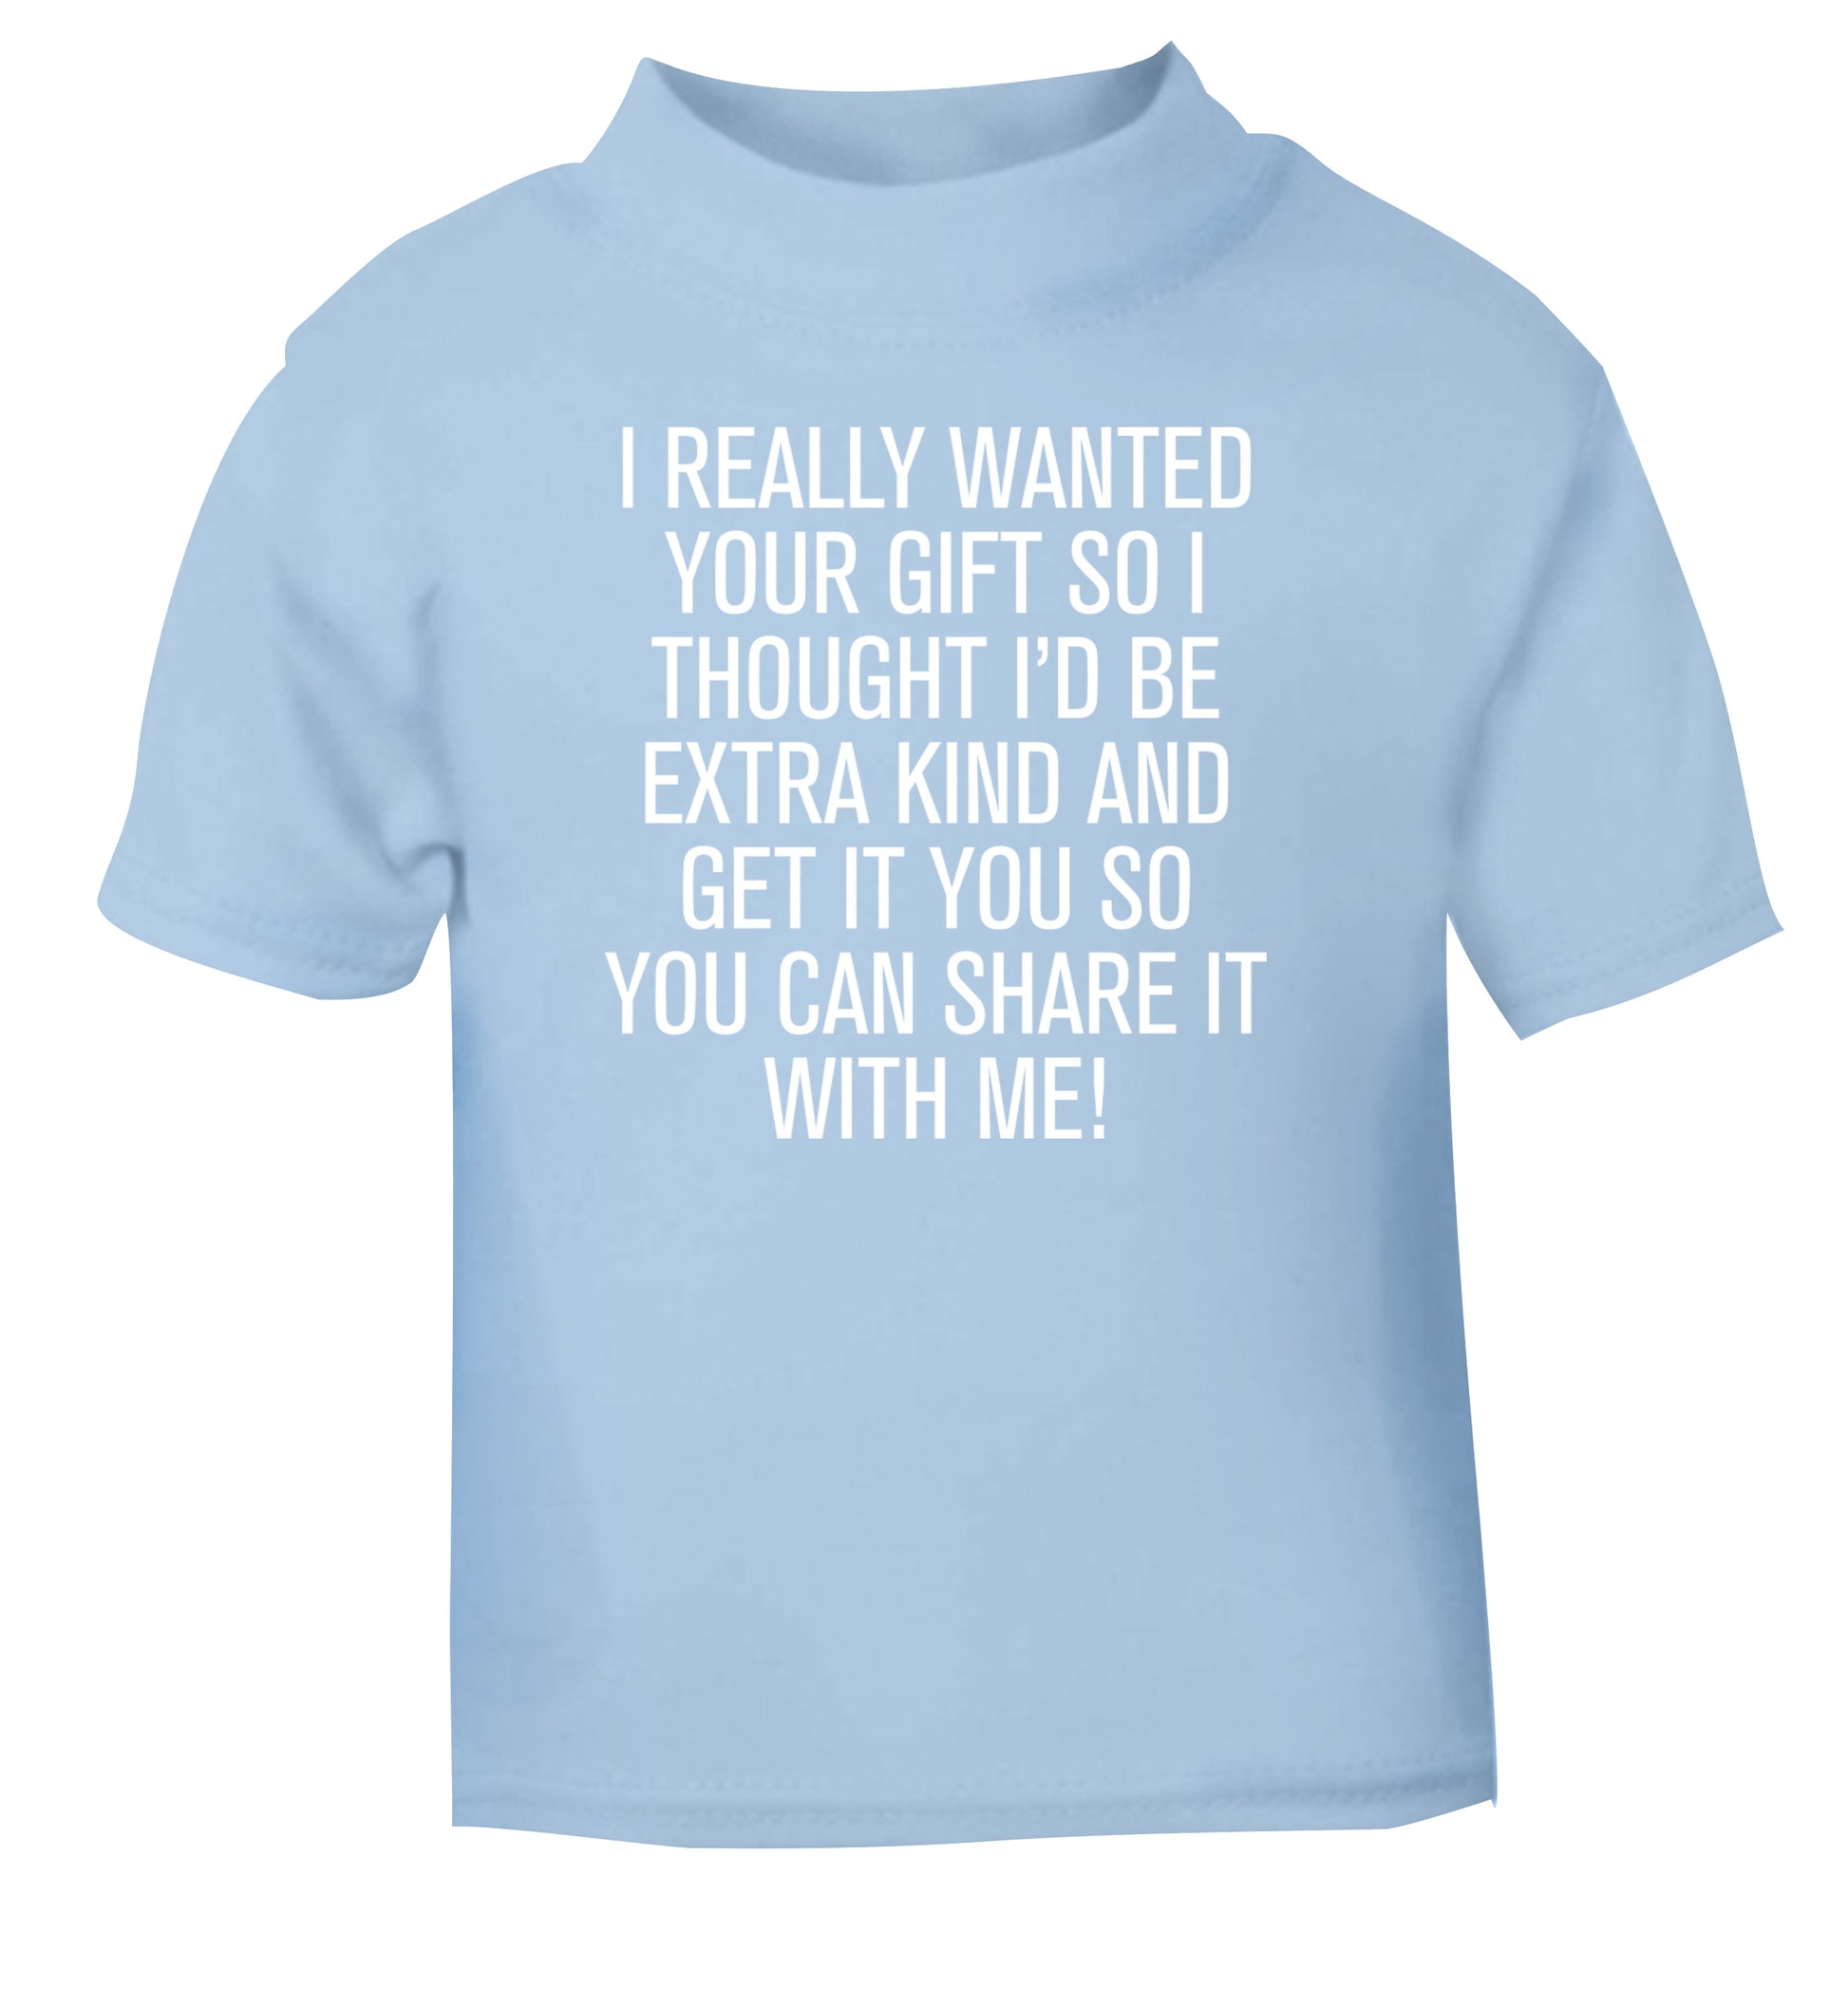 I really wanted your gift light blue Baby Toddler Tshirt 2 Years